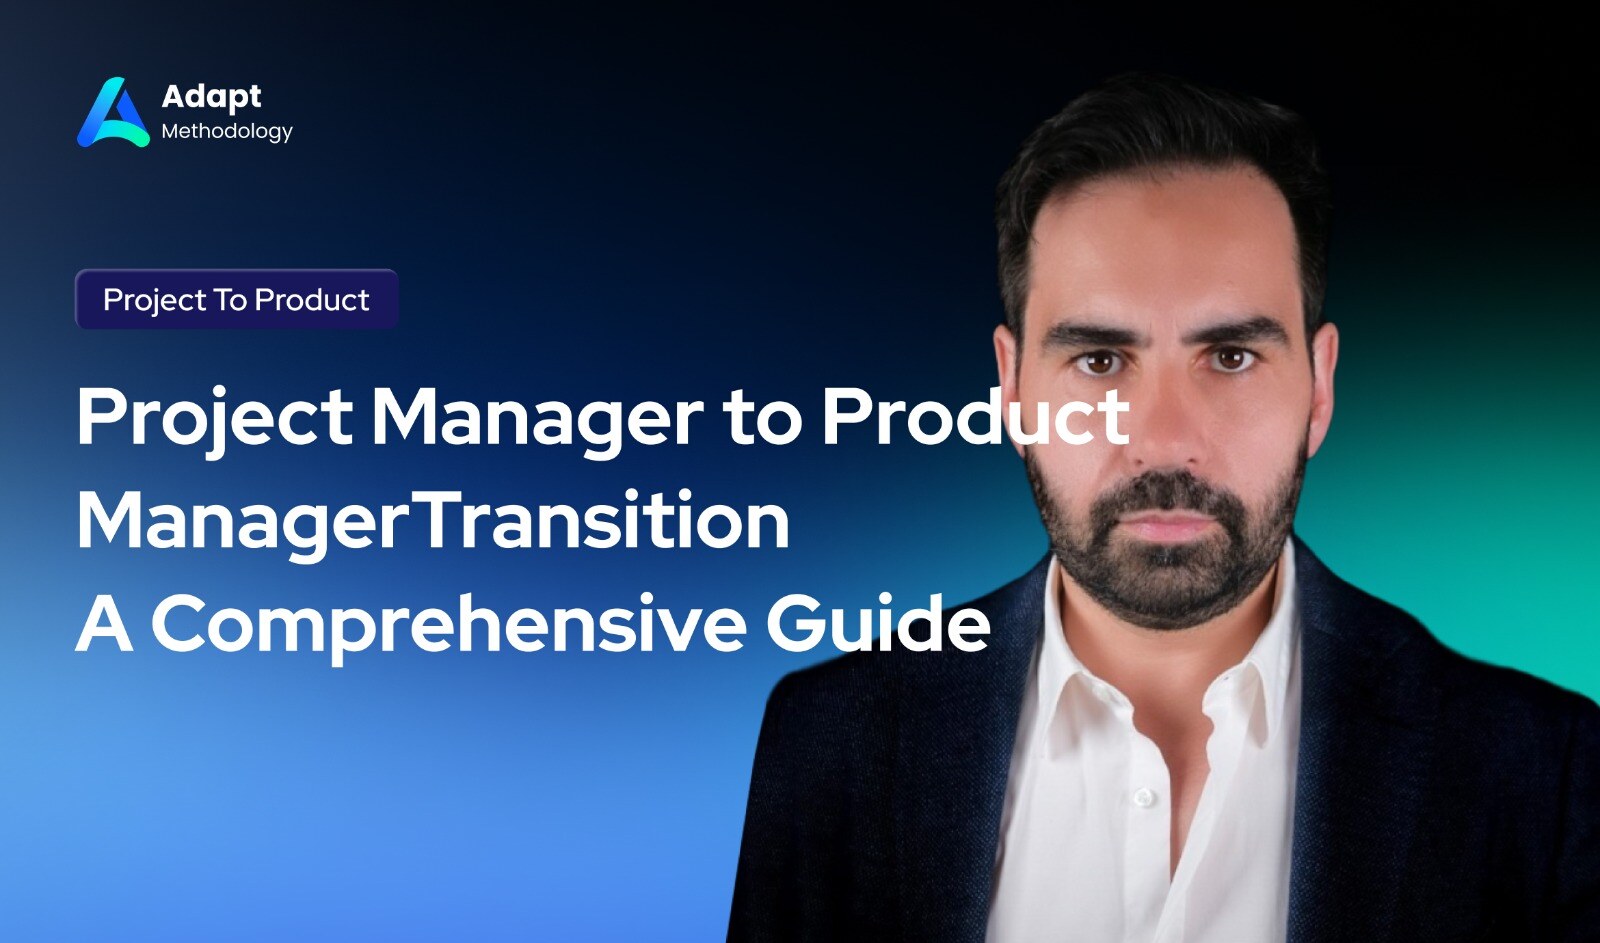 Project Manager to Product Manager Transition